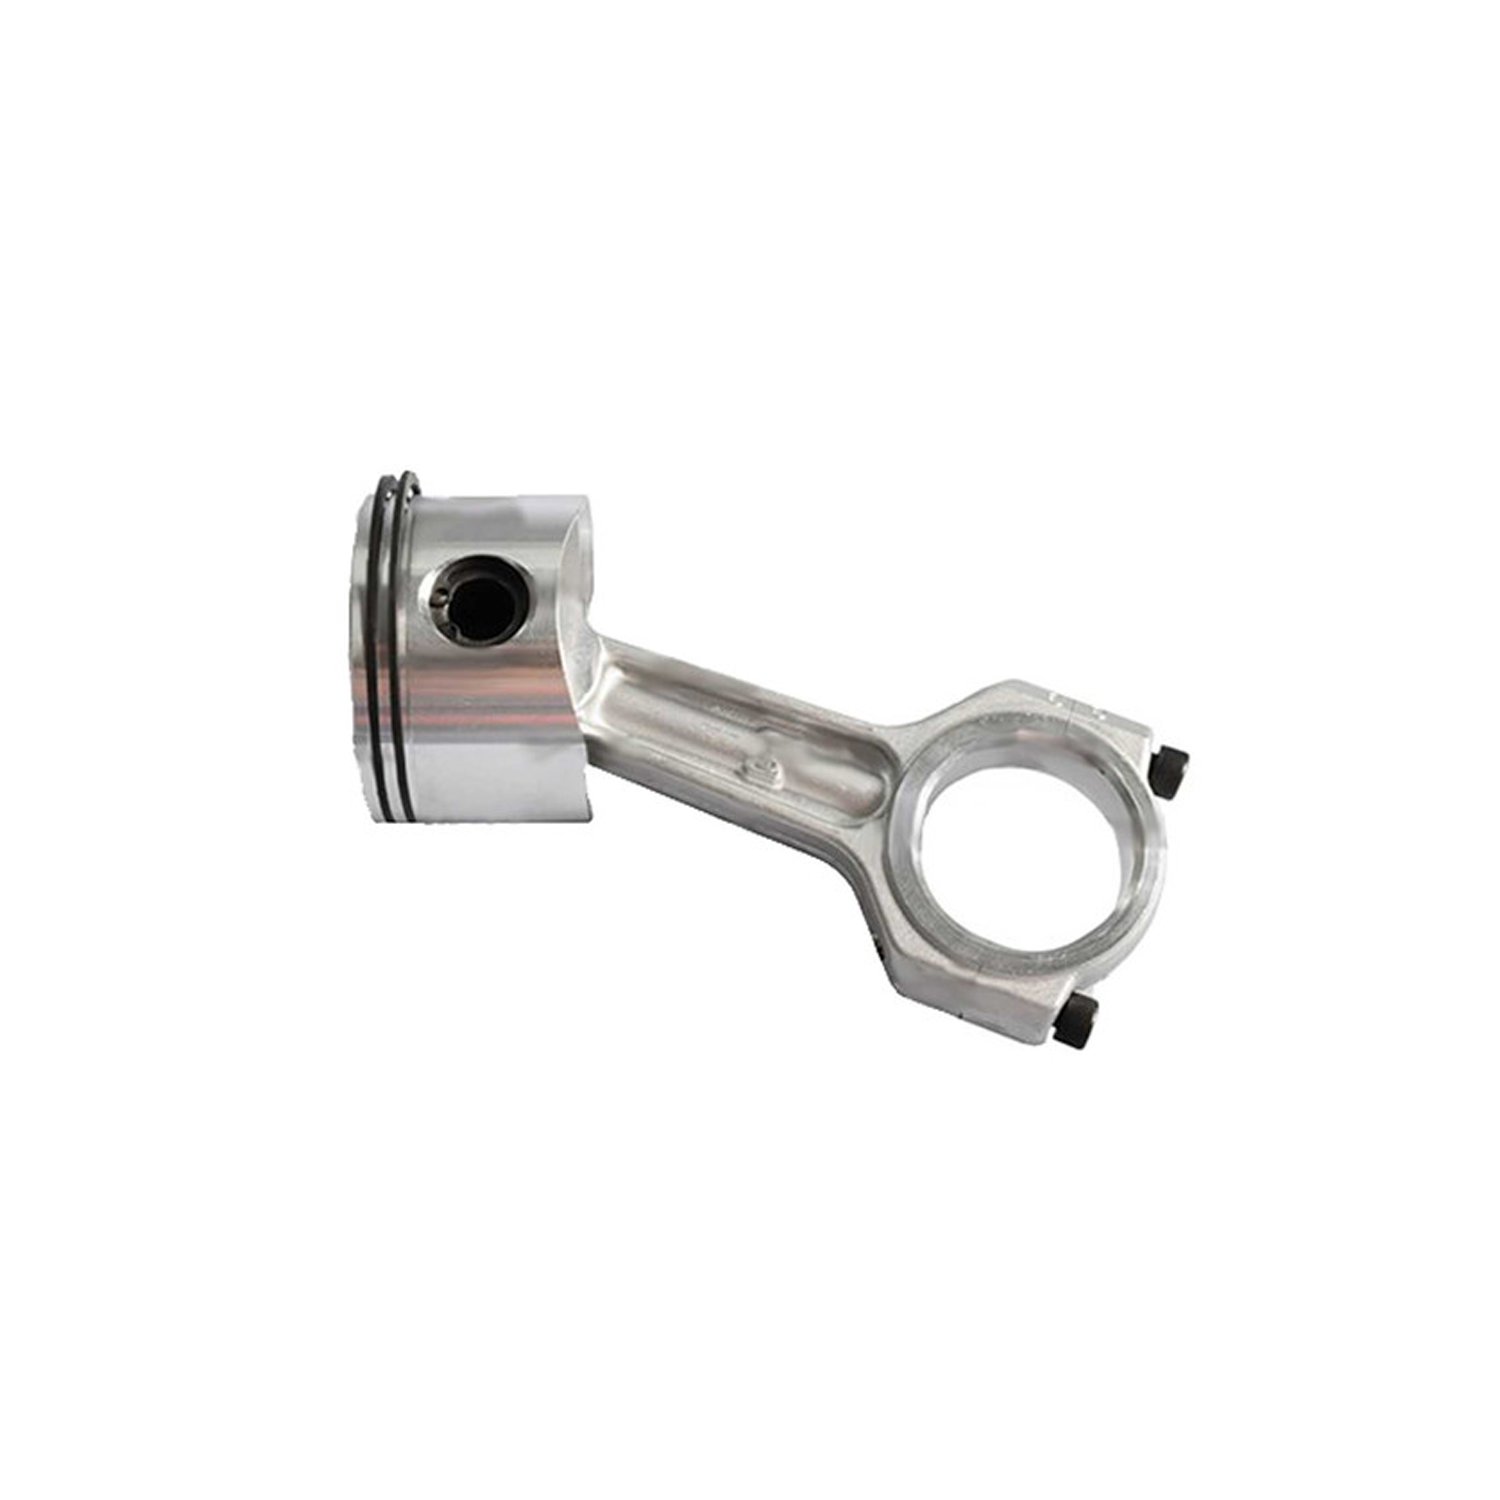 Piston with connecting rod for compressor Dorin K1, MCD113